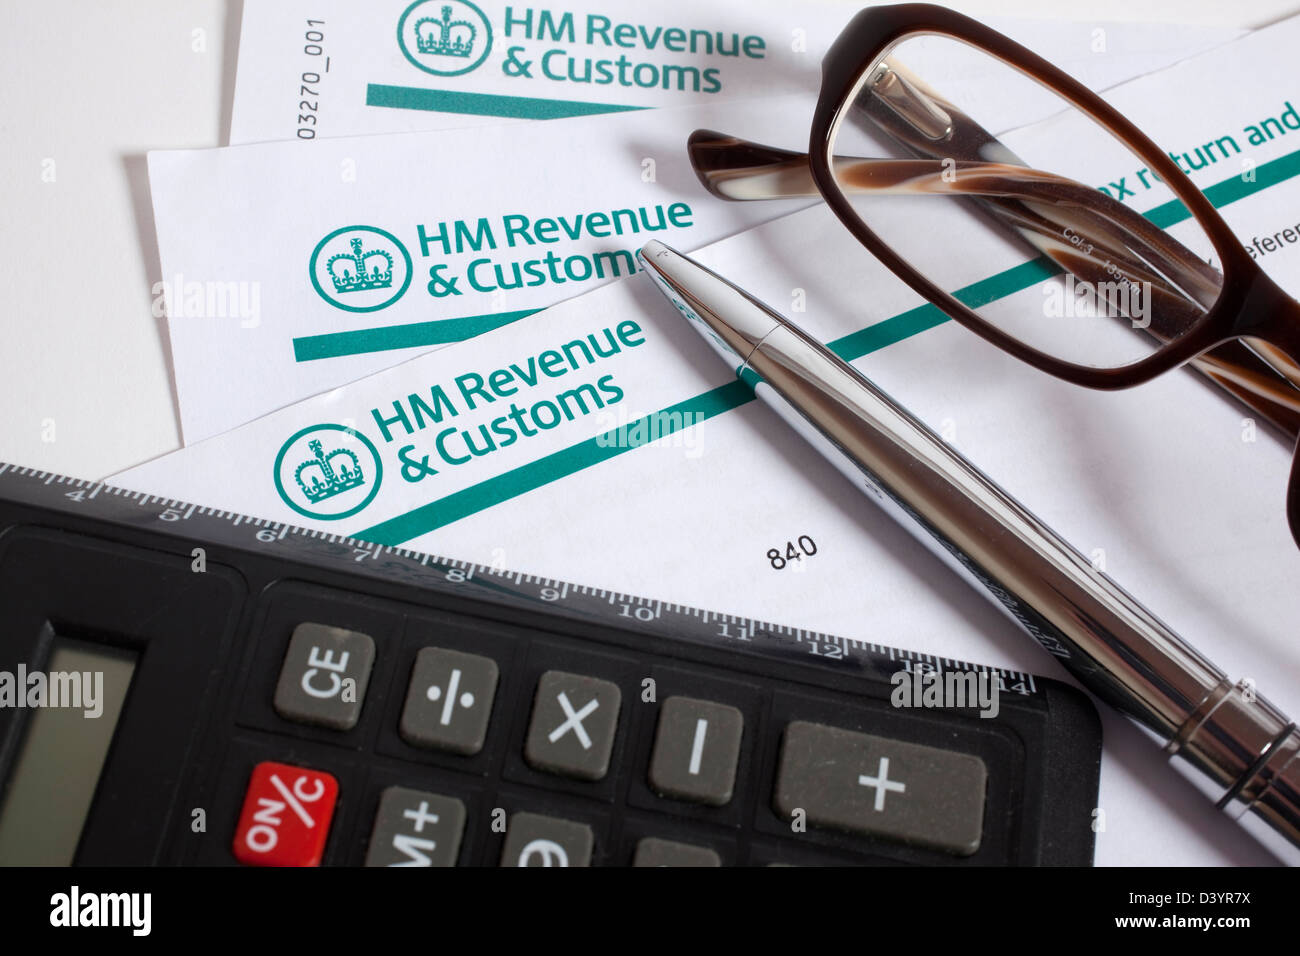 london-uk-january-24th-2019-hmrc-her-majesty-s-revenue-and-customs